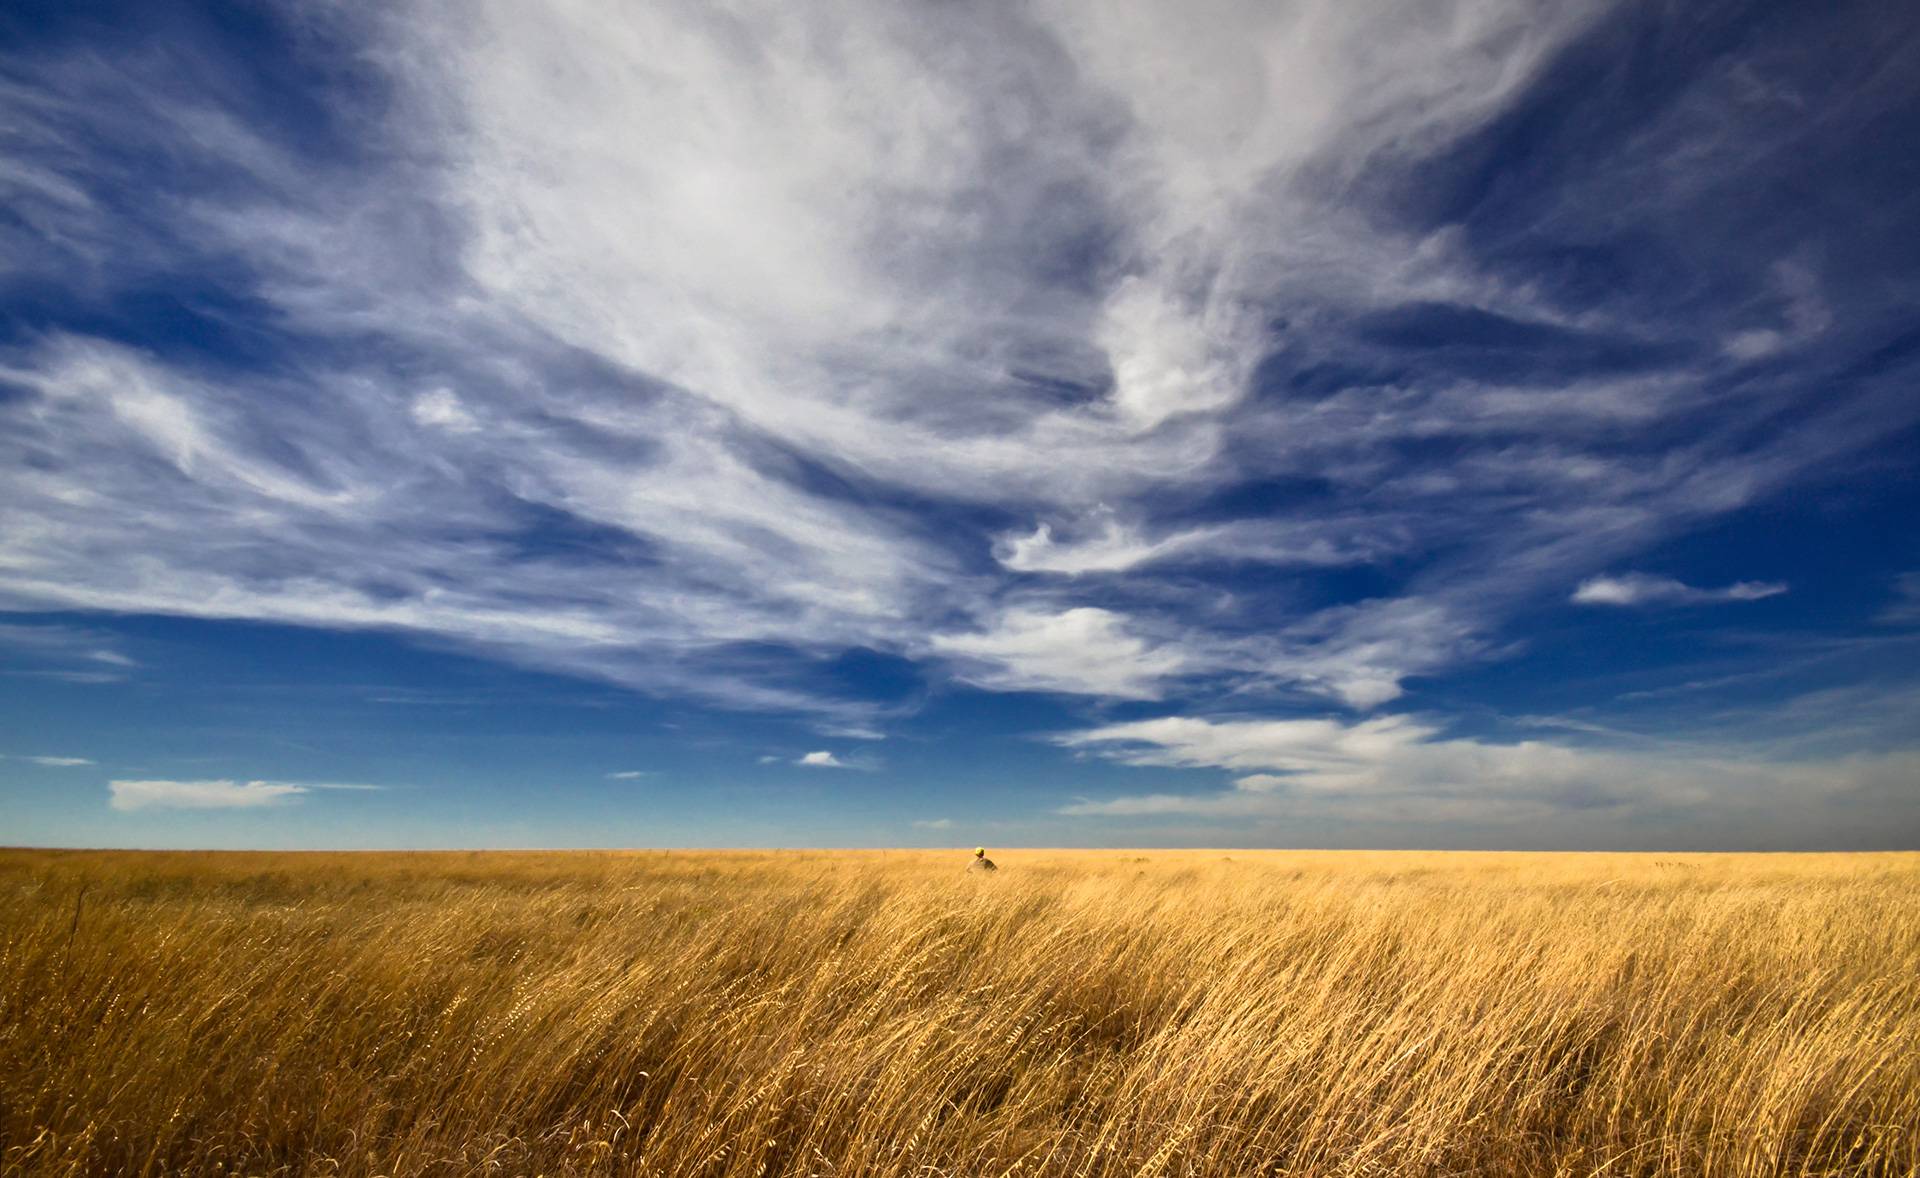 Deep blue sky with wispy clouds above golden field 